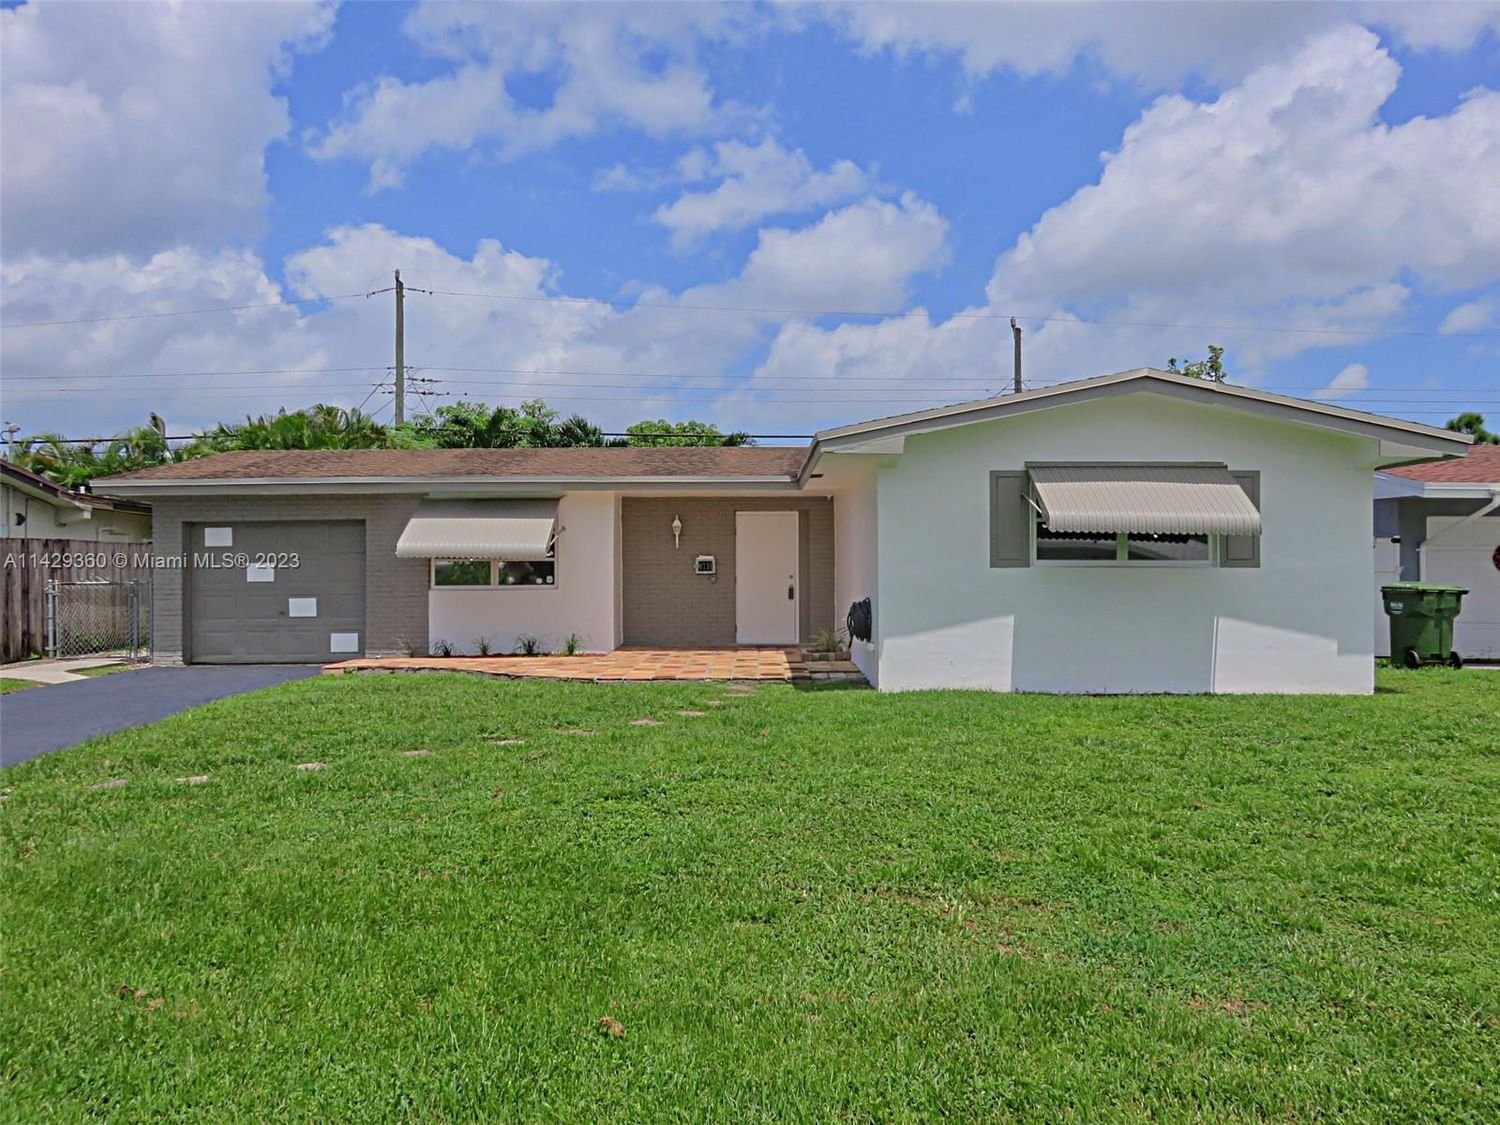 Real estate property located at 8731 16th St, Broward County, Pembroke Pines, FL